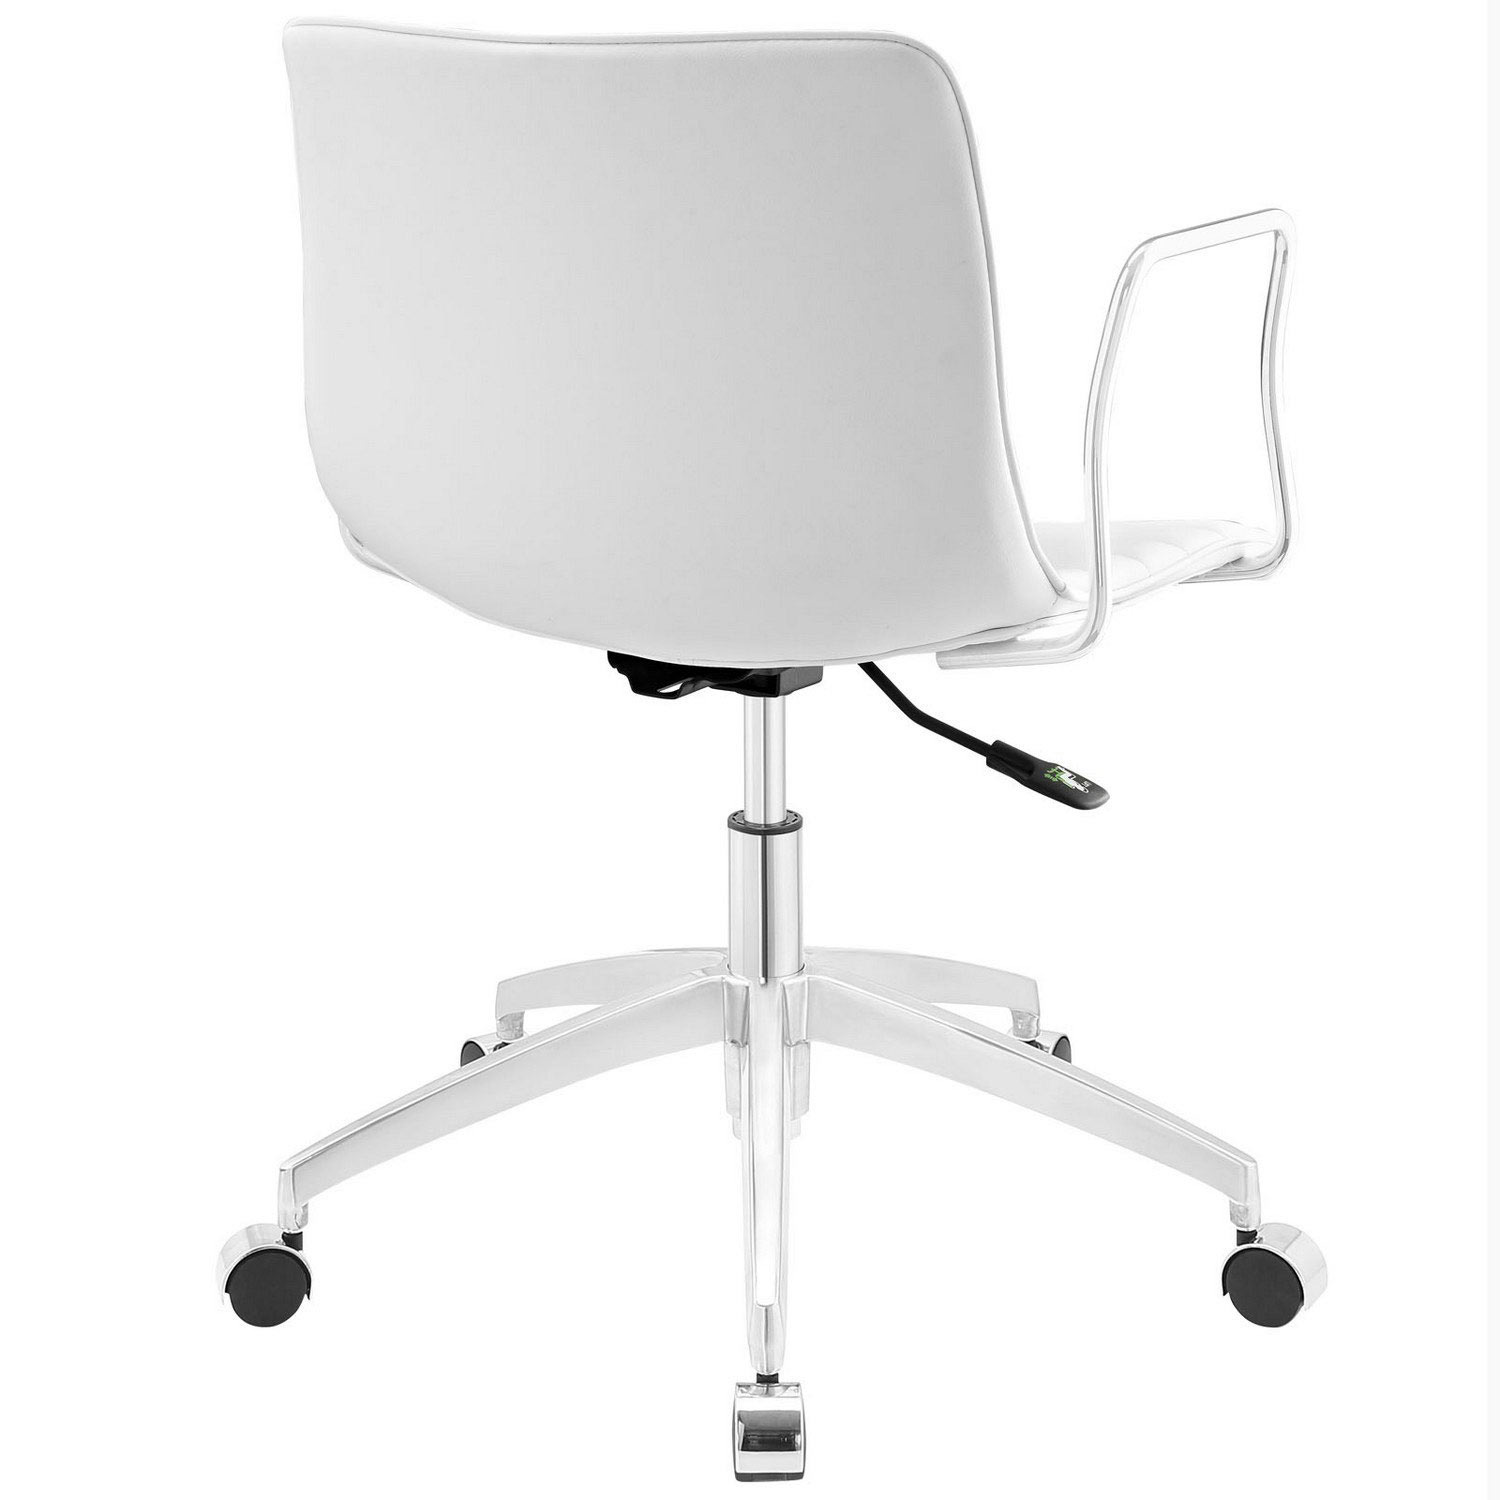 Modway Celerity Office Chair - White